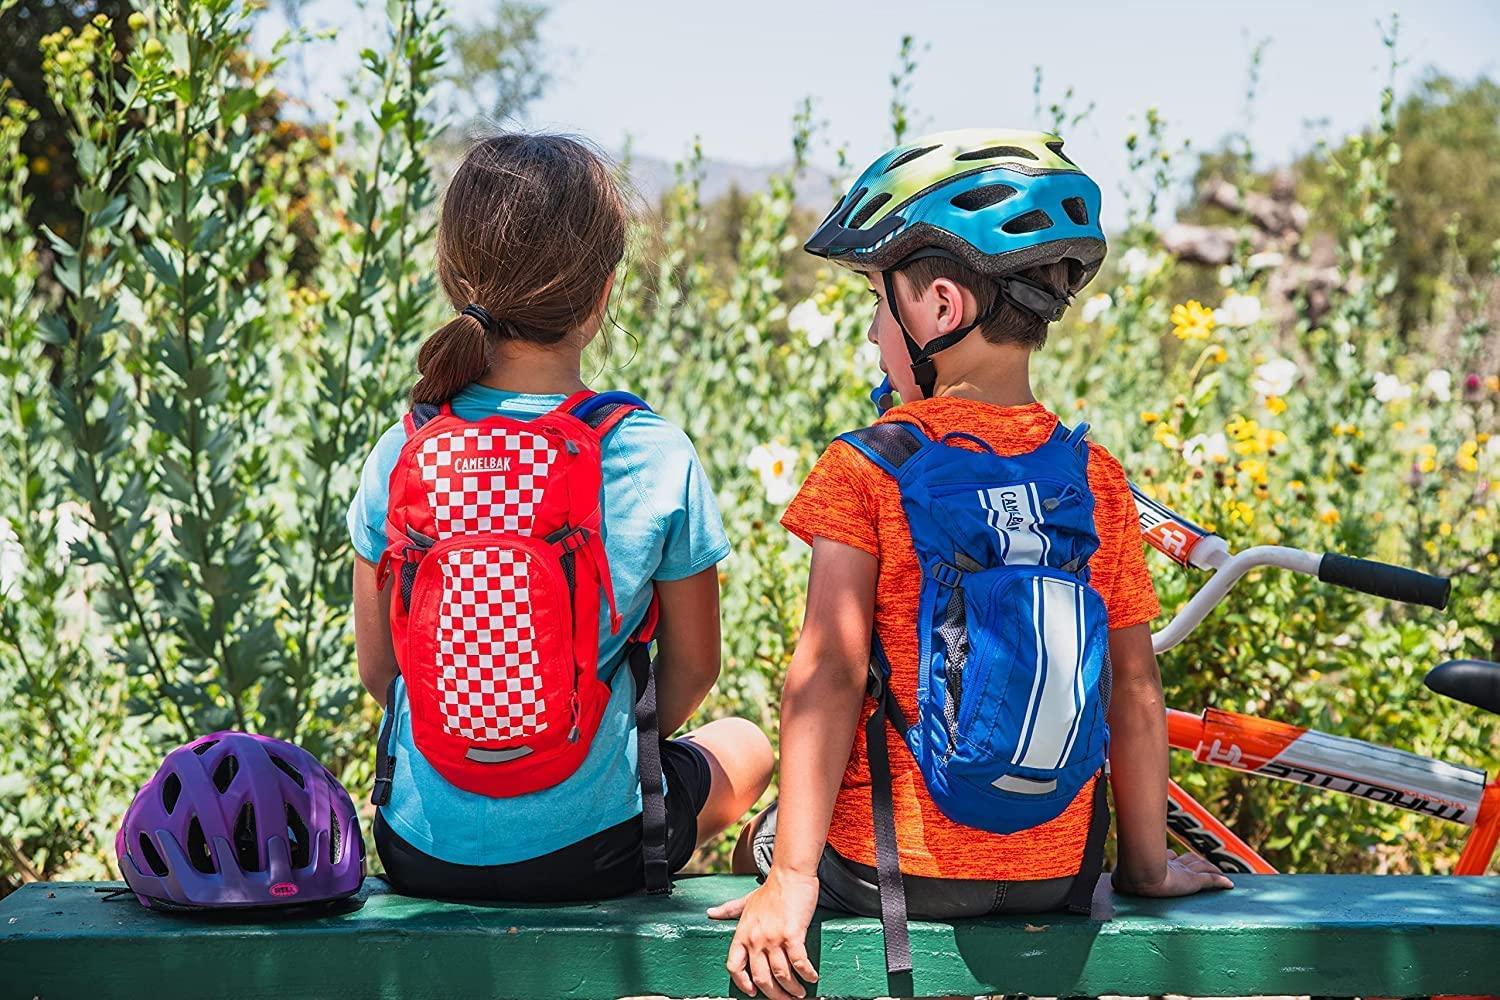 Review: Camelbak Kids' Scout™ Hydration Pack – Lost on the Trail